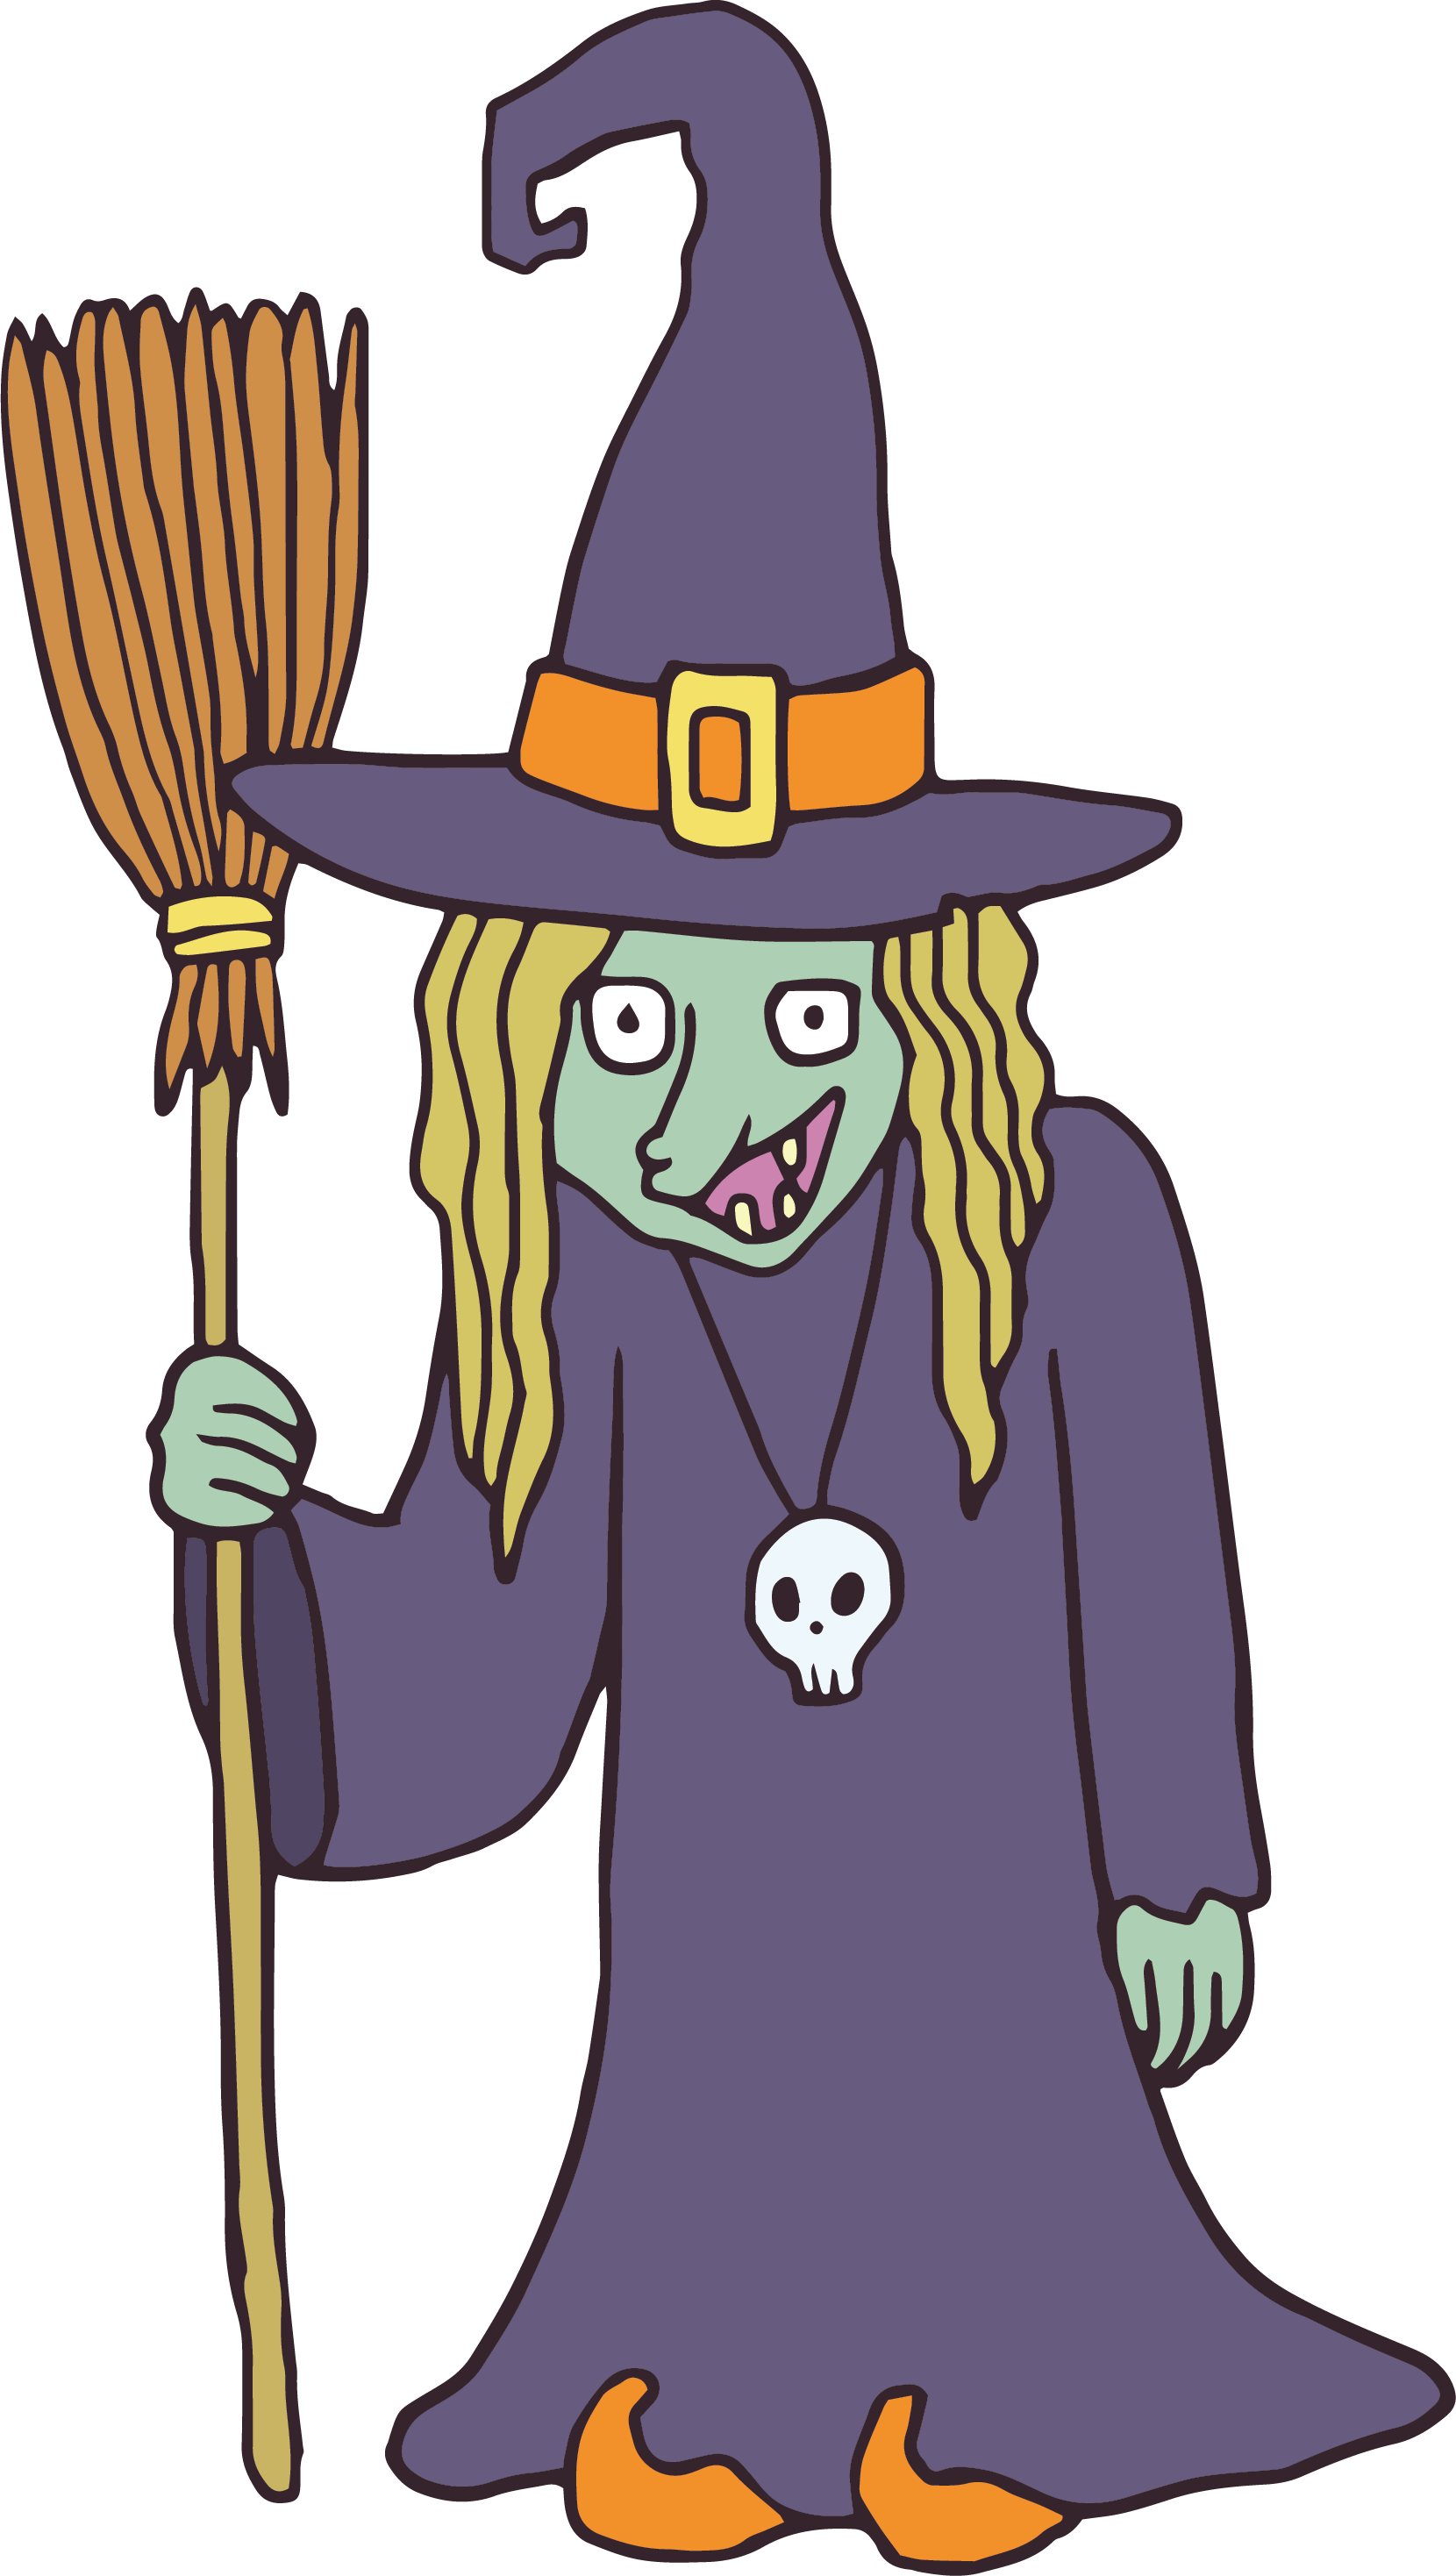 Cartoon Witchwith Broomand Skull Accessory